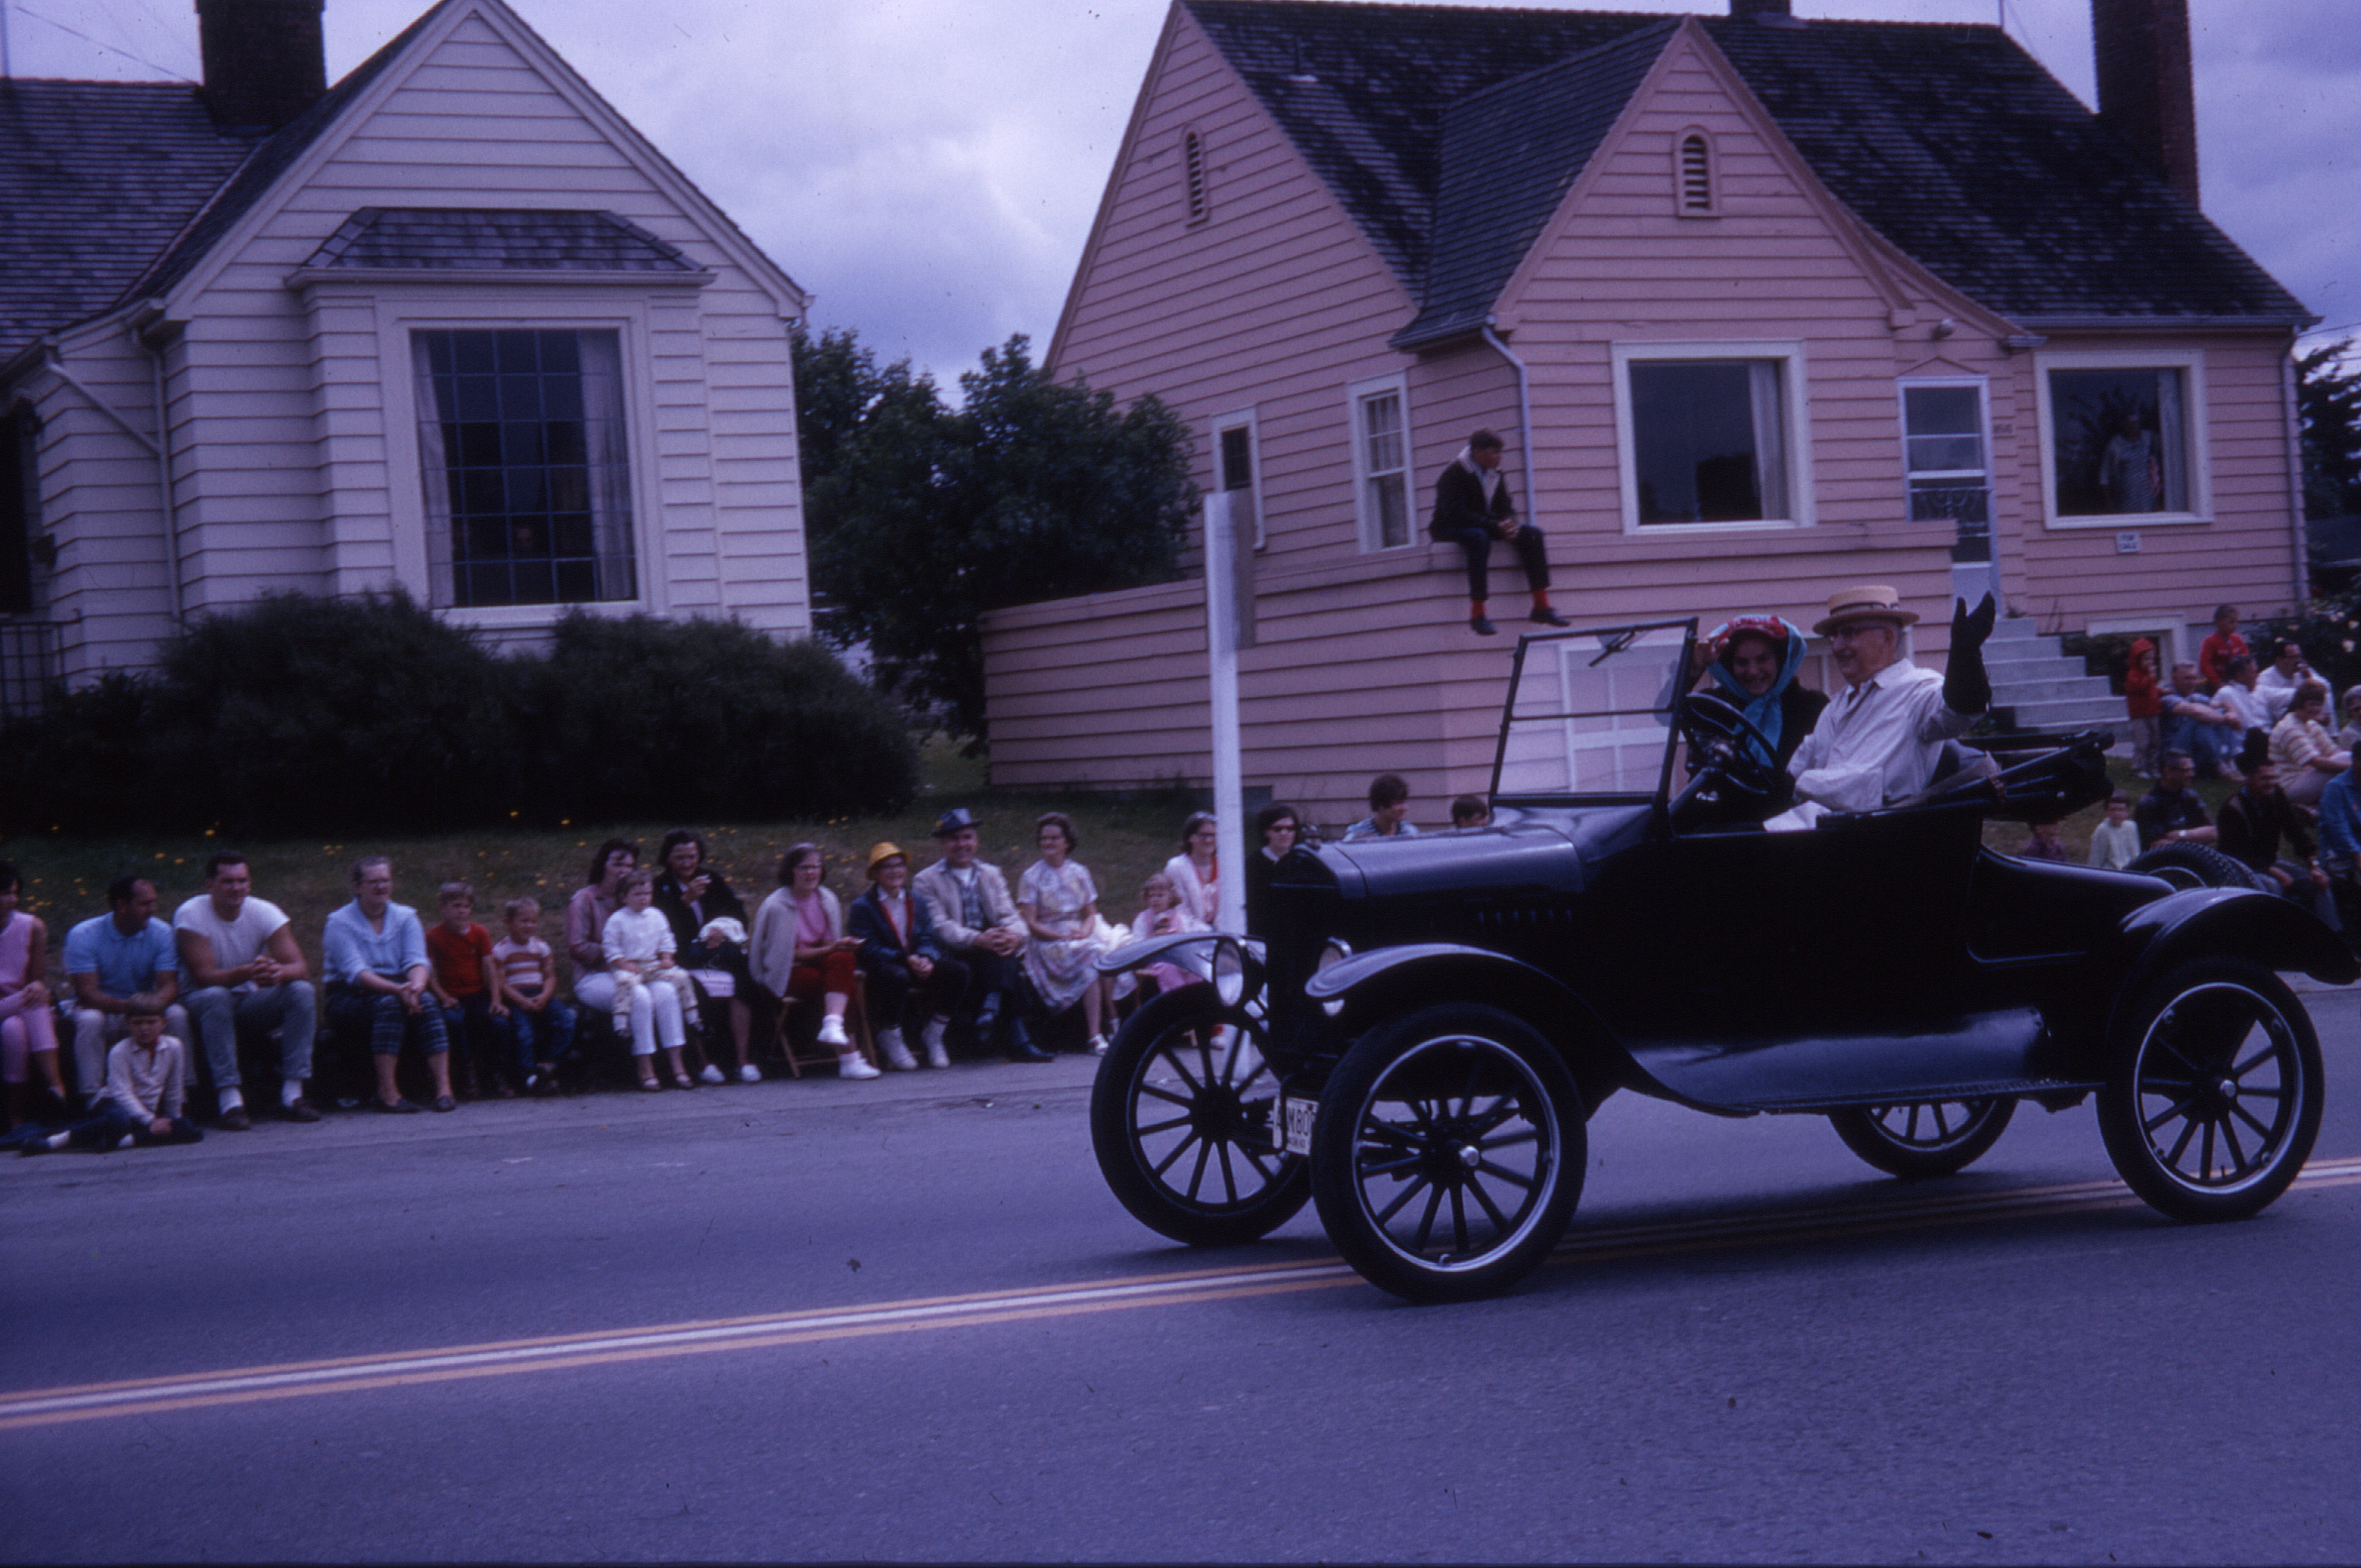 Near the start of the parade on Main Street, Charles Green drives his Model T Ford with passenger Ursula Hölscher, an exchange student from Krefeld-Uerdingen in Germany. Charles Green was a Ford dealer in Bothell from 1919 until selling the business to his son in 1954.